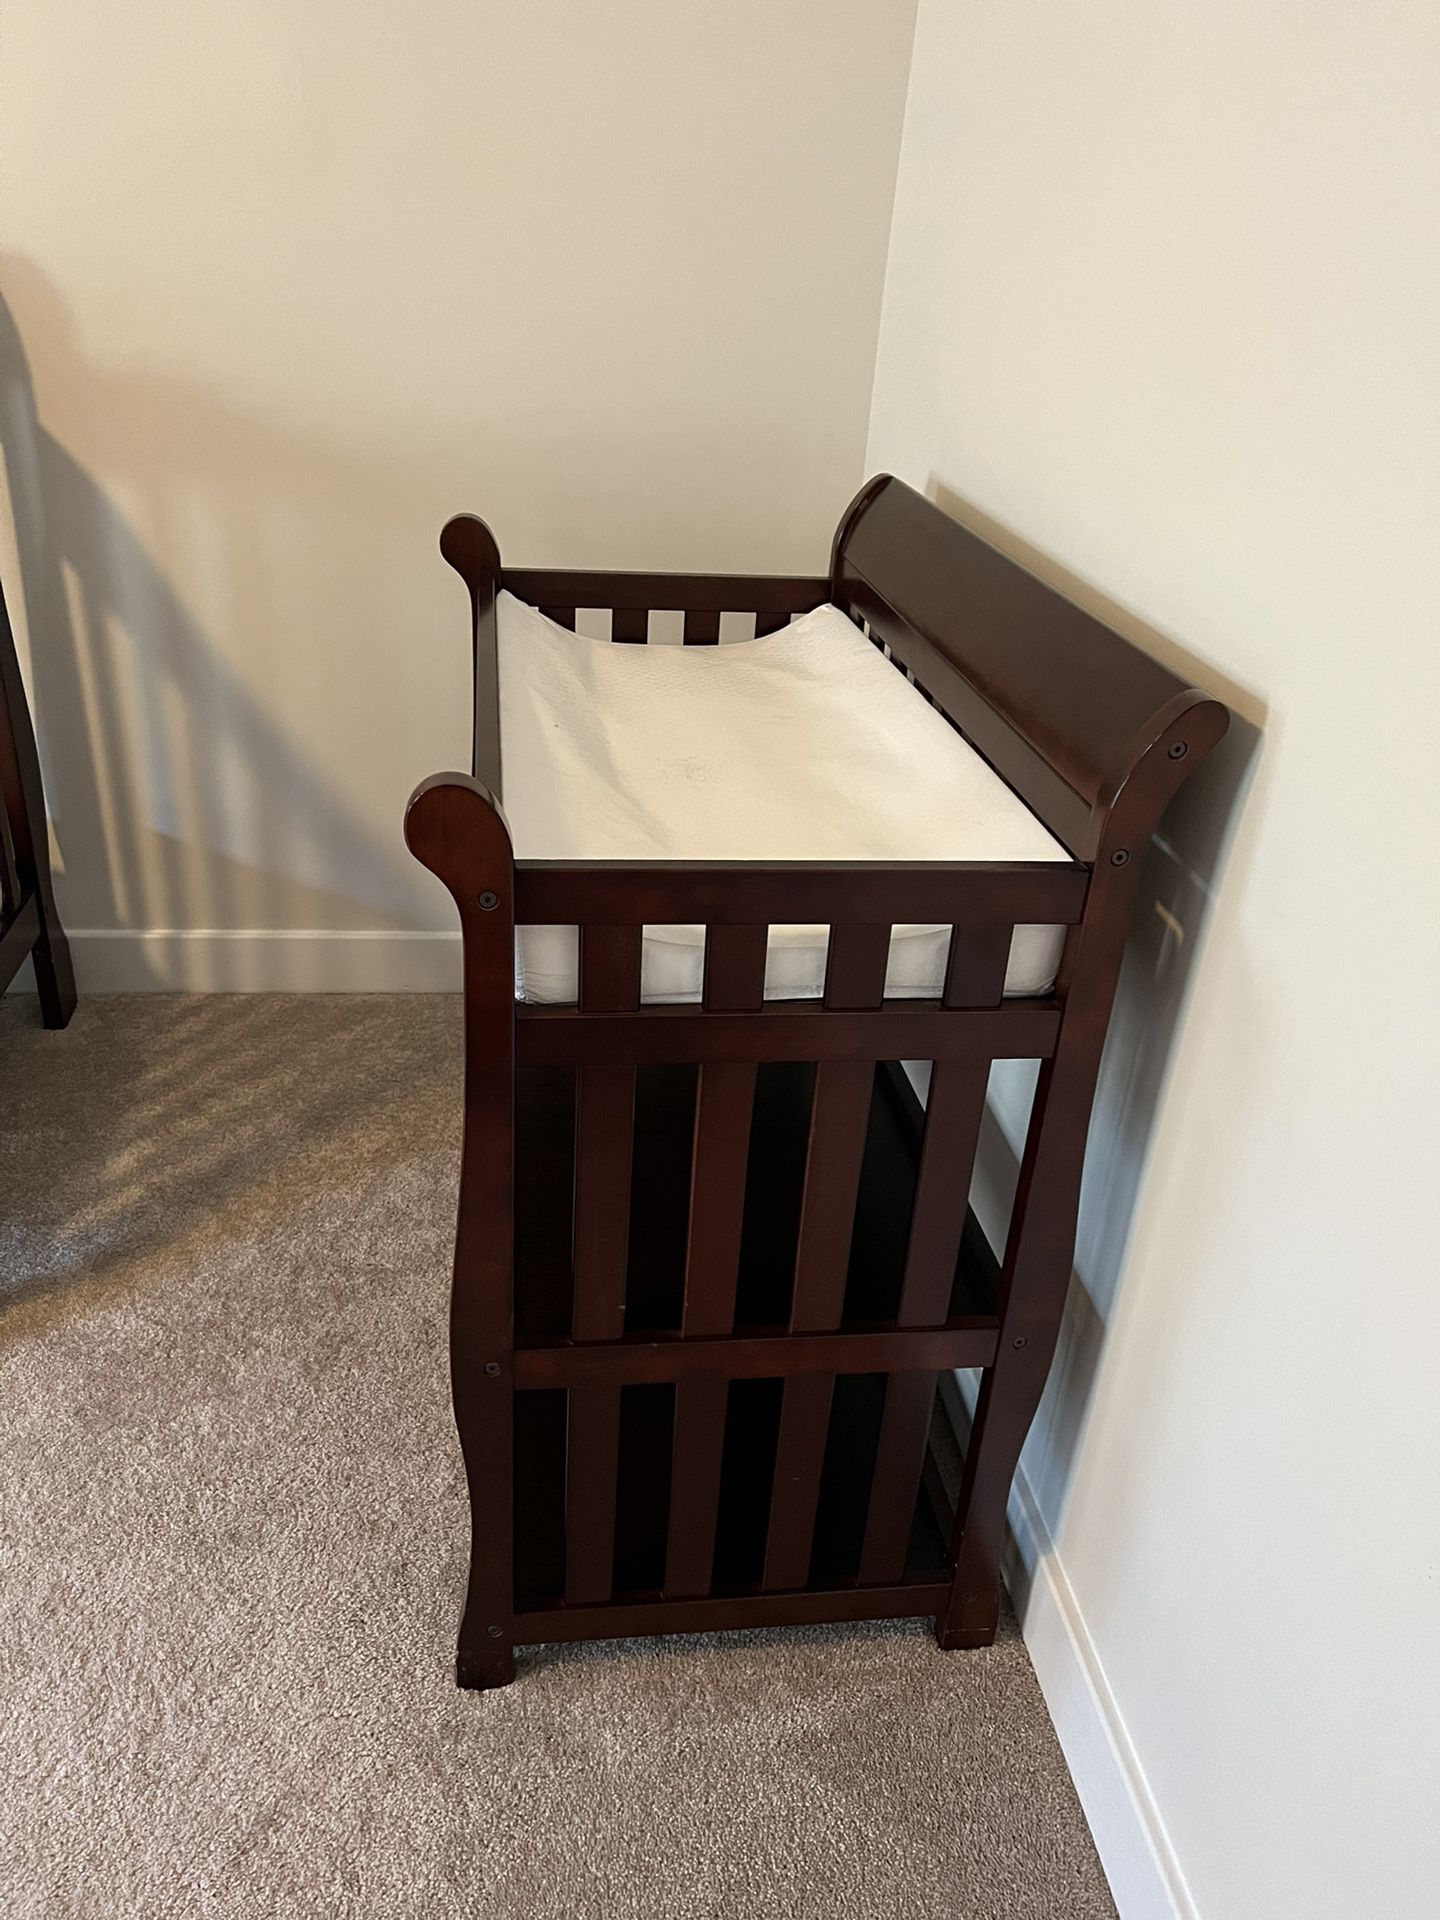 Crib and Diaper Changing Table